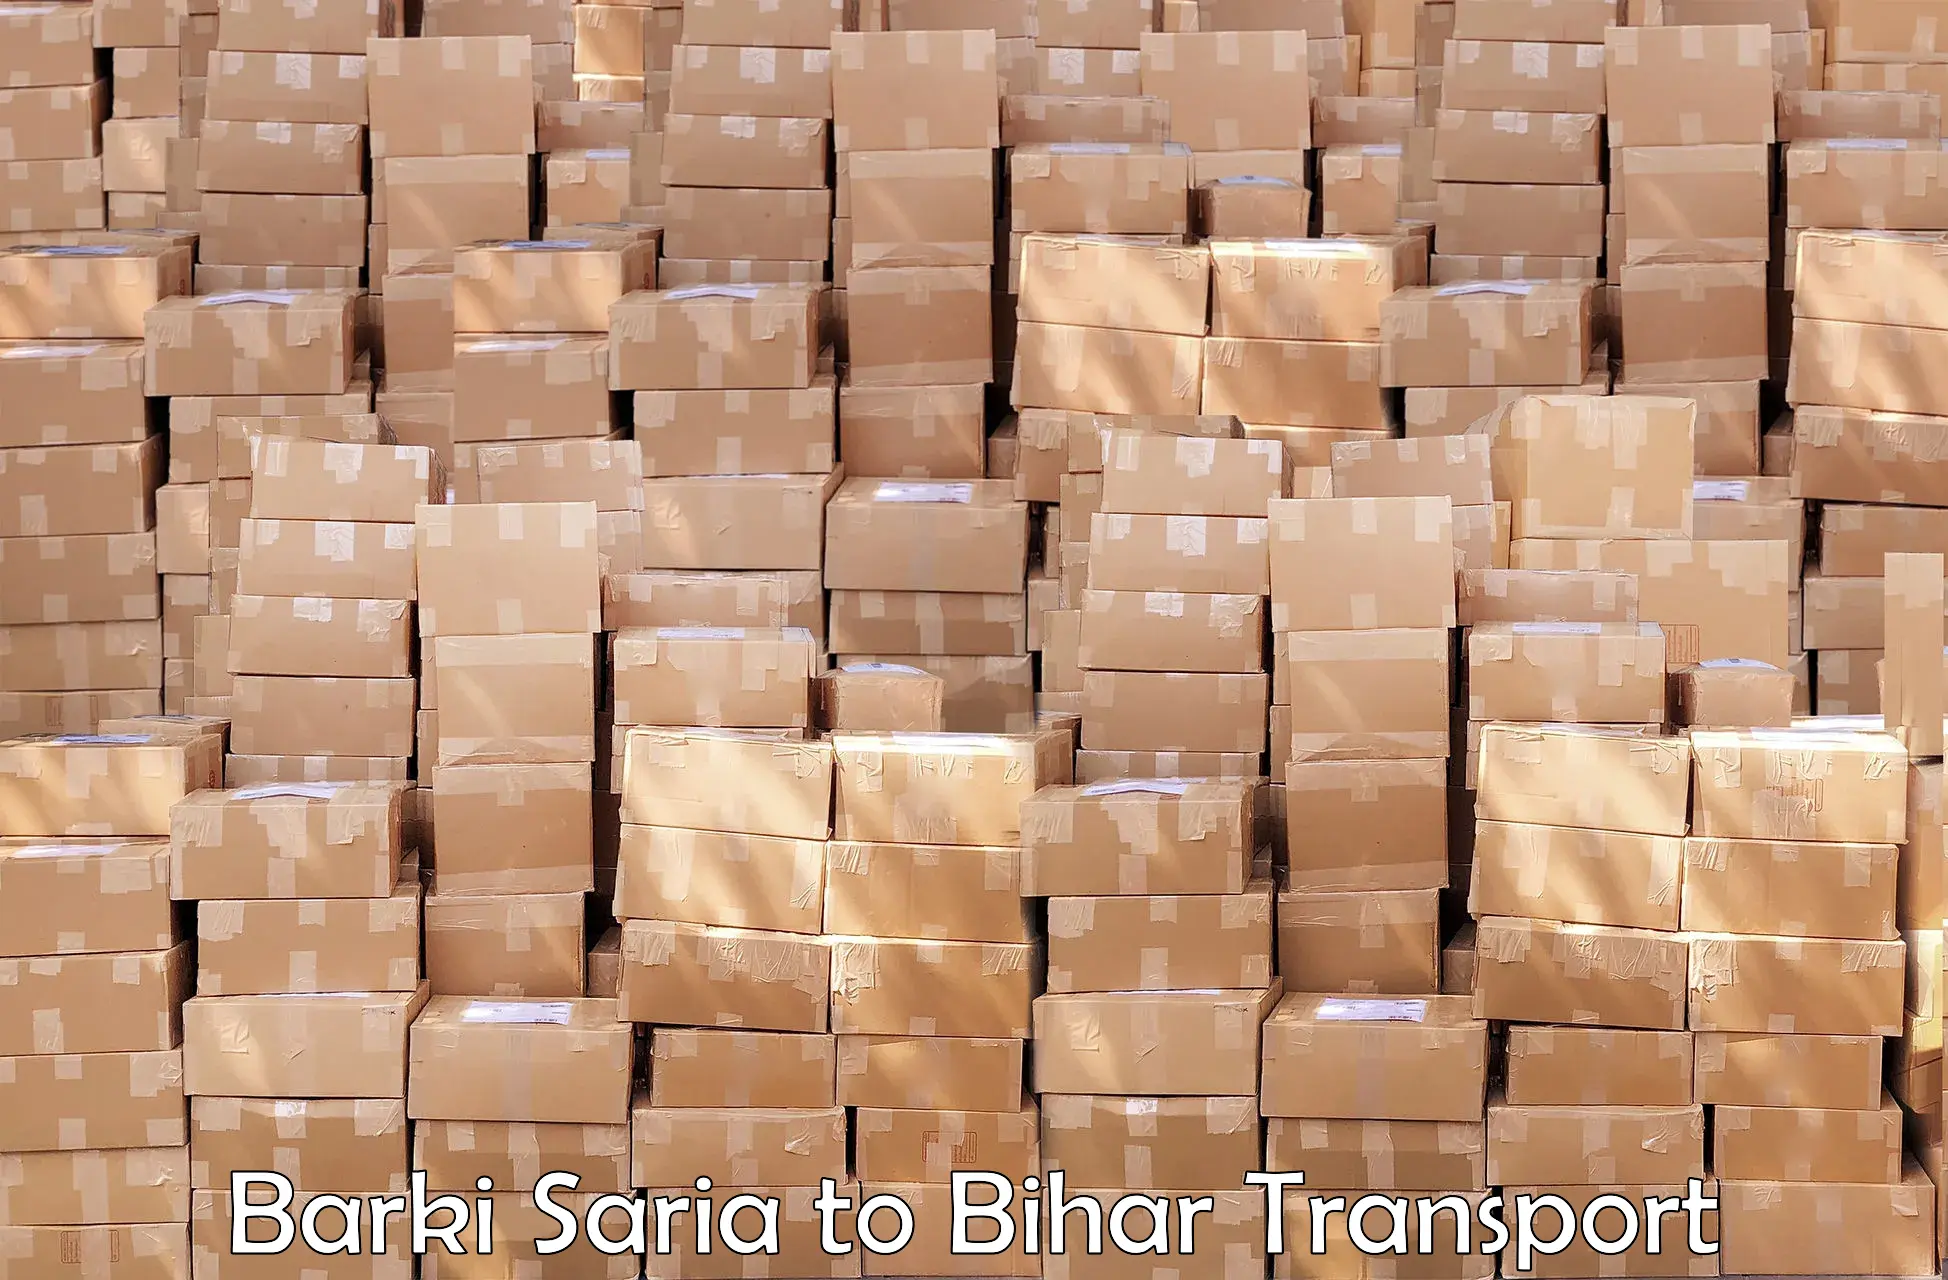 Air freight transport services in Barki Saria to Makhdumpur